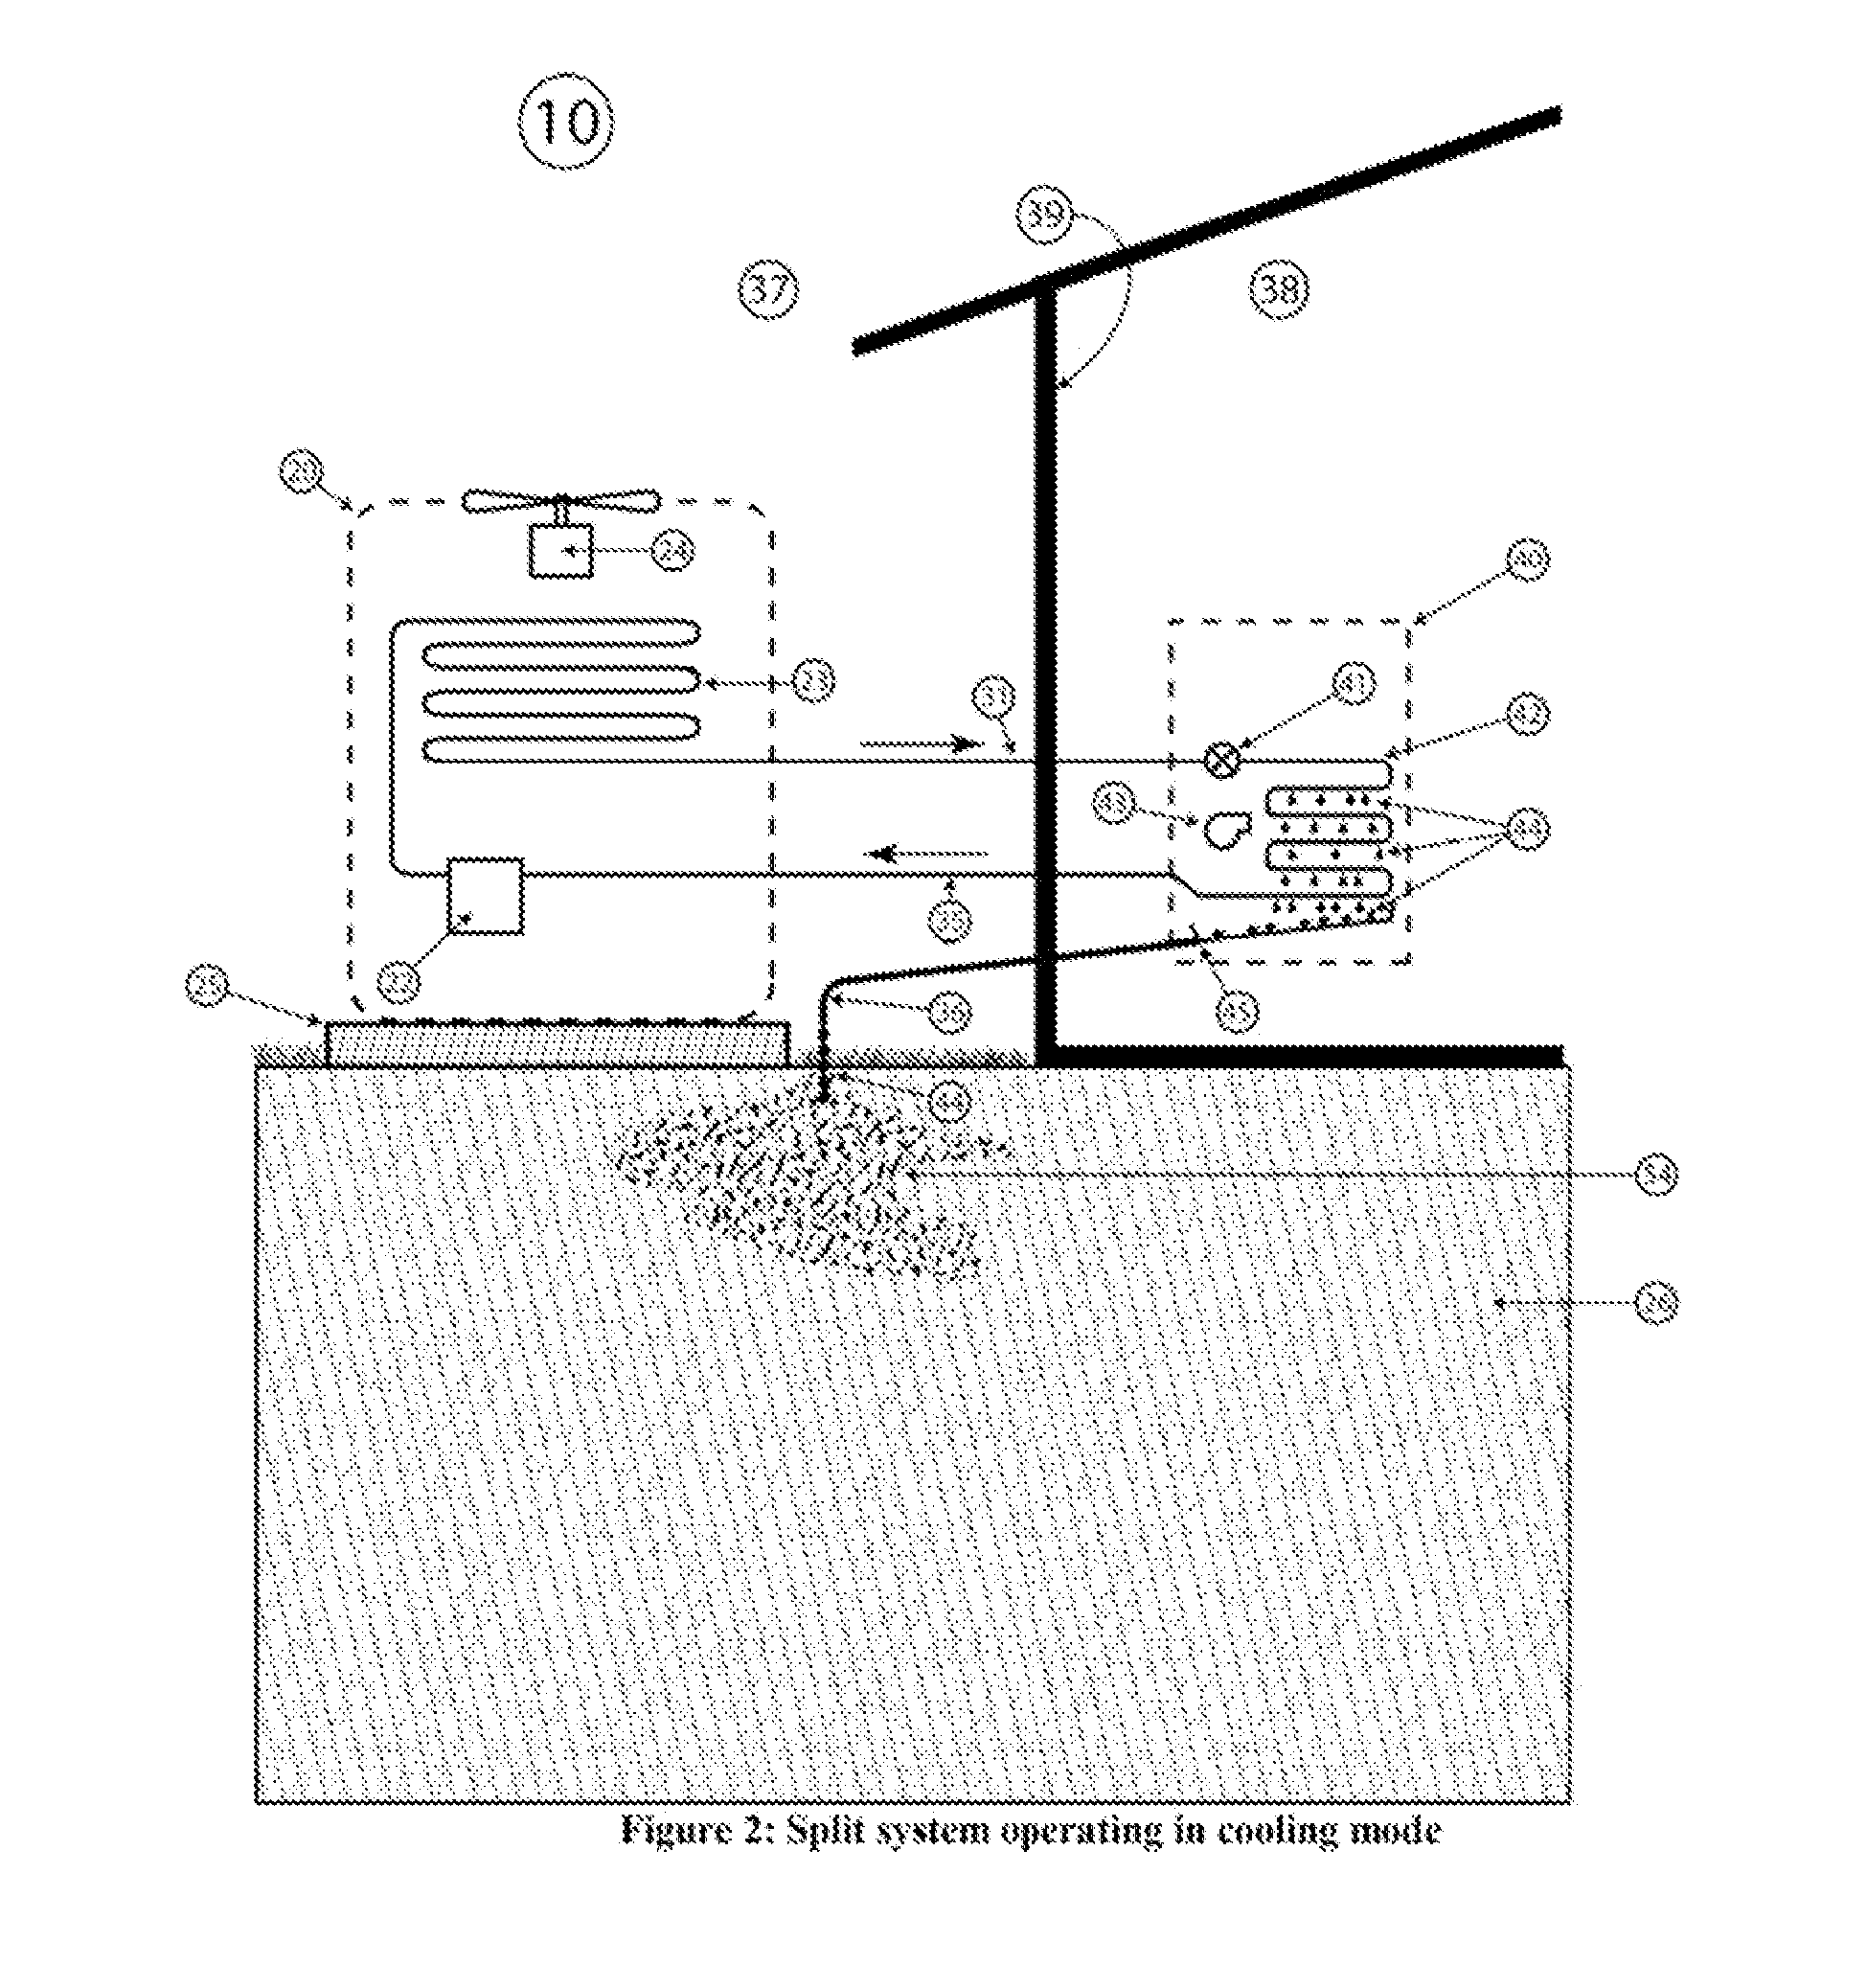 Cost-effective remote monitoring, diagnostic and system health prediction system and method for vapor compression and heat pump units based on compressor discharge line temperature sampling